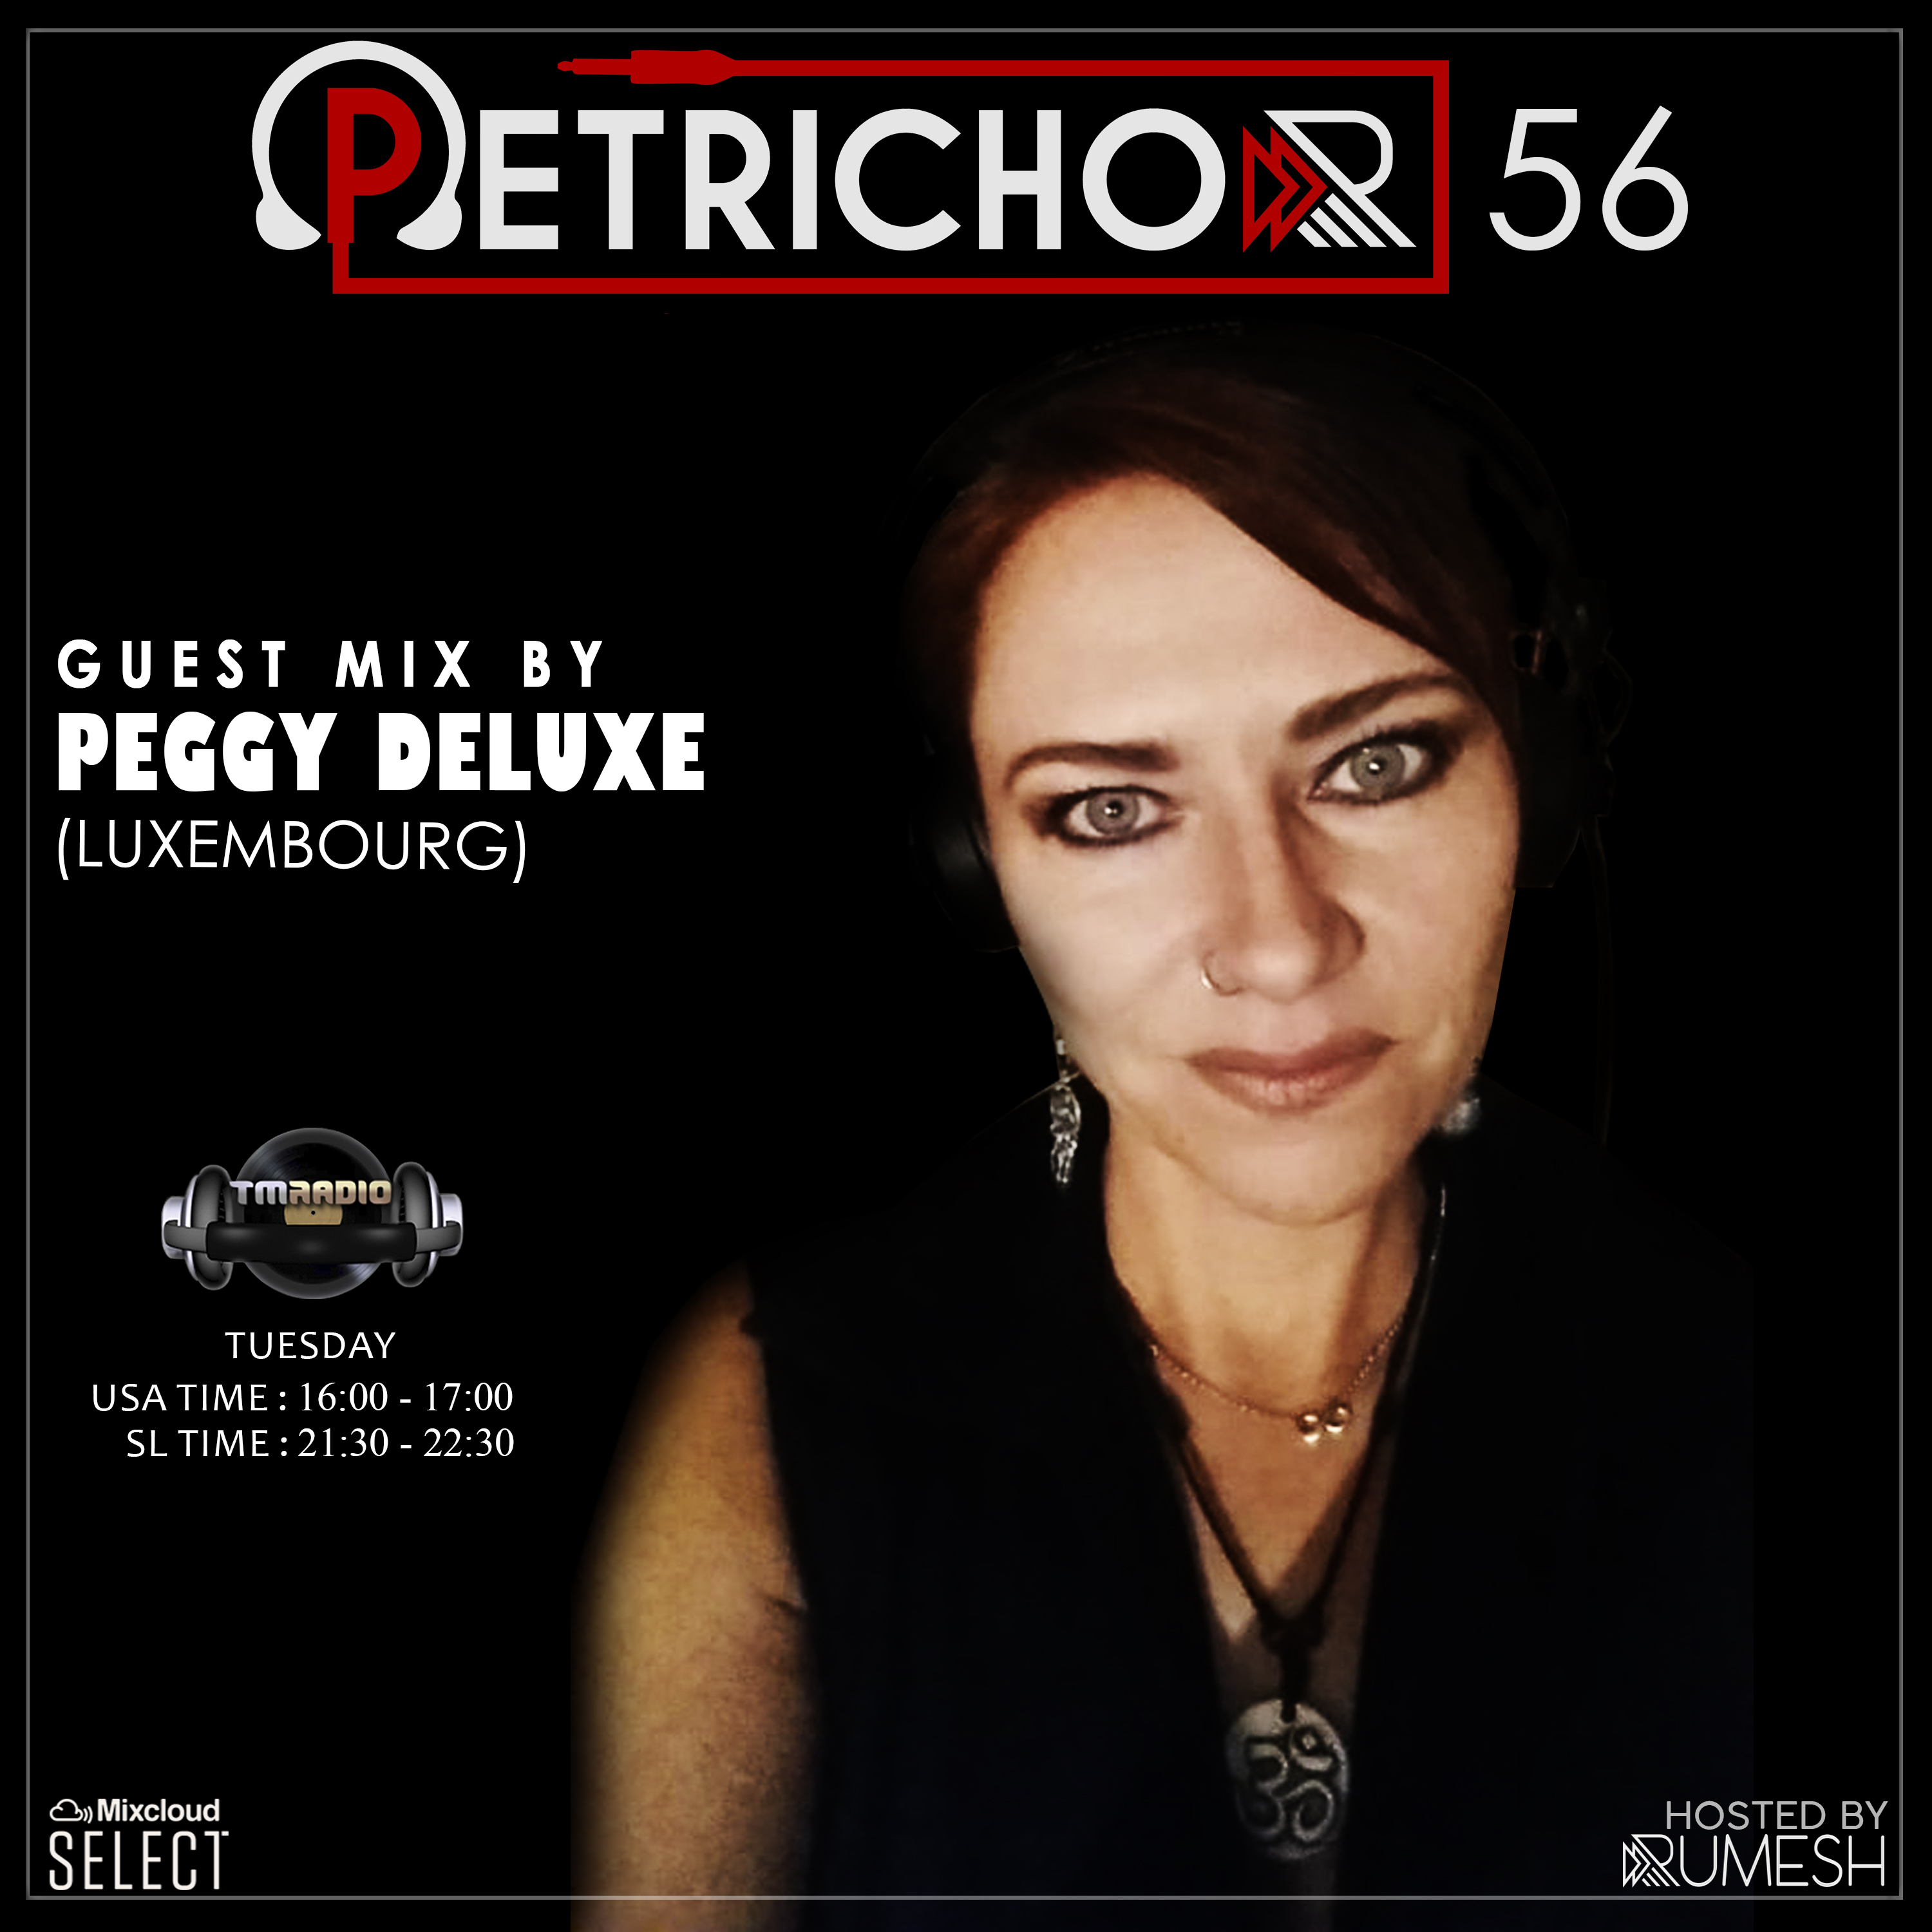 Petrichor 56 guest mix by Peggy Deluxe (Luxembourg) (from December 3rd, 2019)